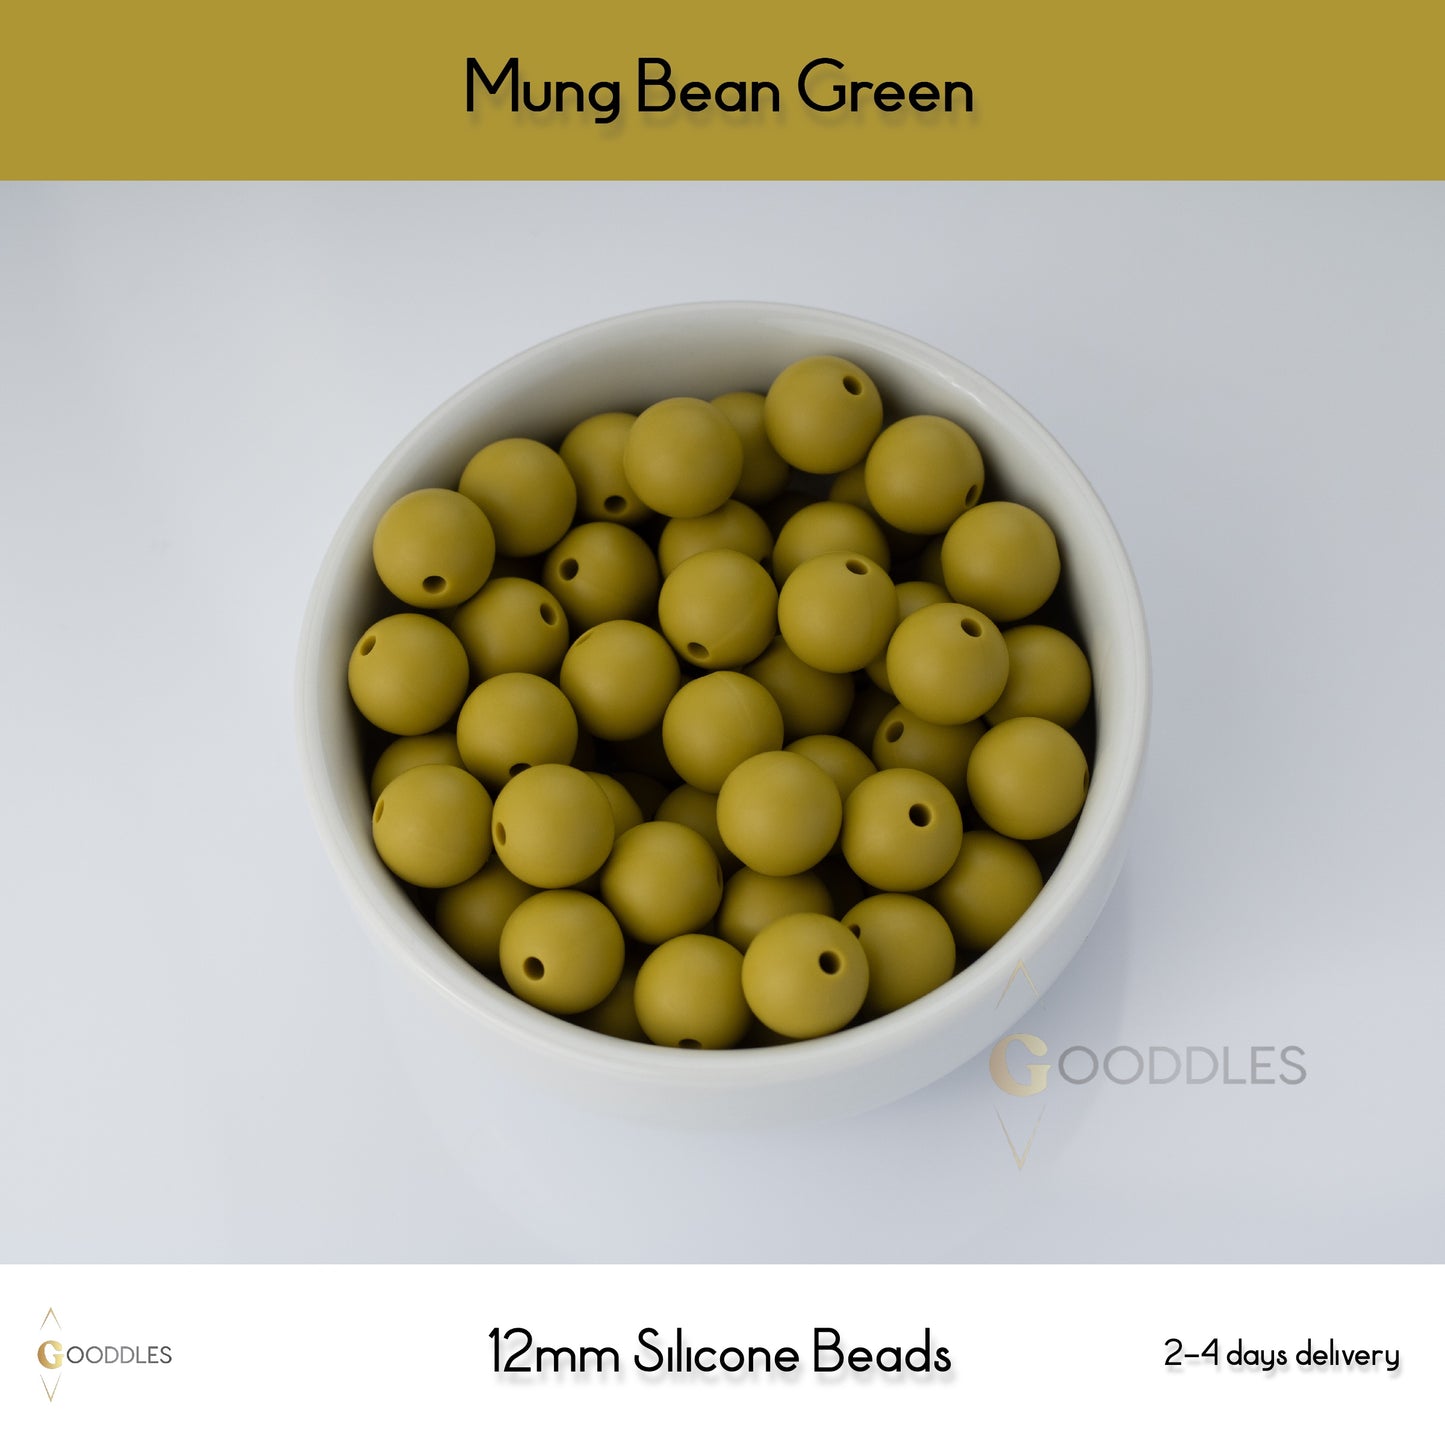 5pcs, Mung Bean Green Silicone Beads Round Silicone Beads